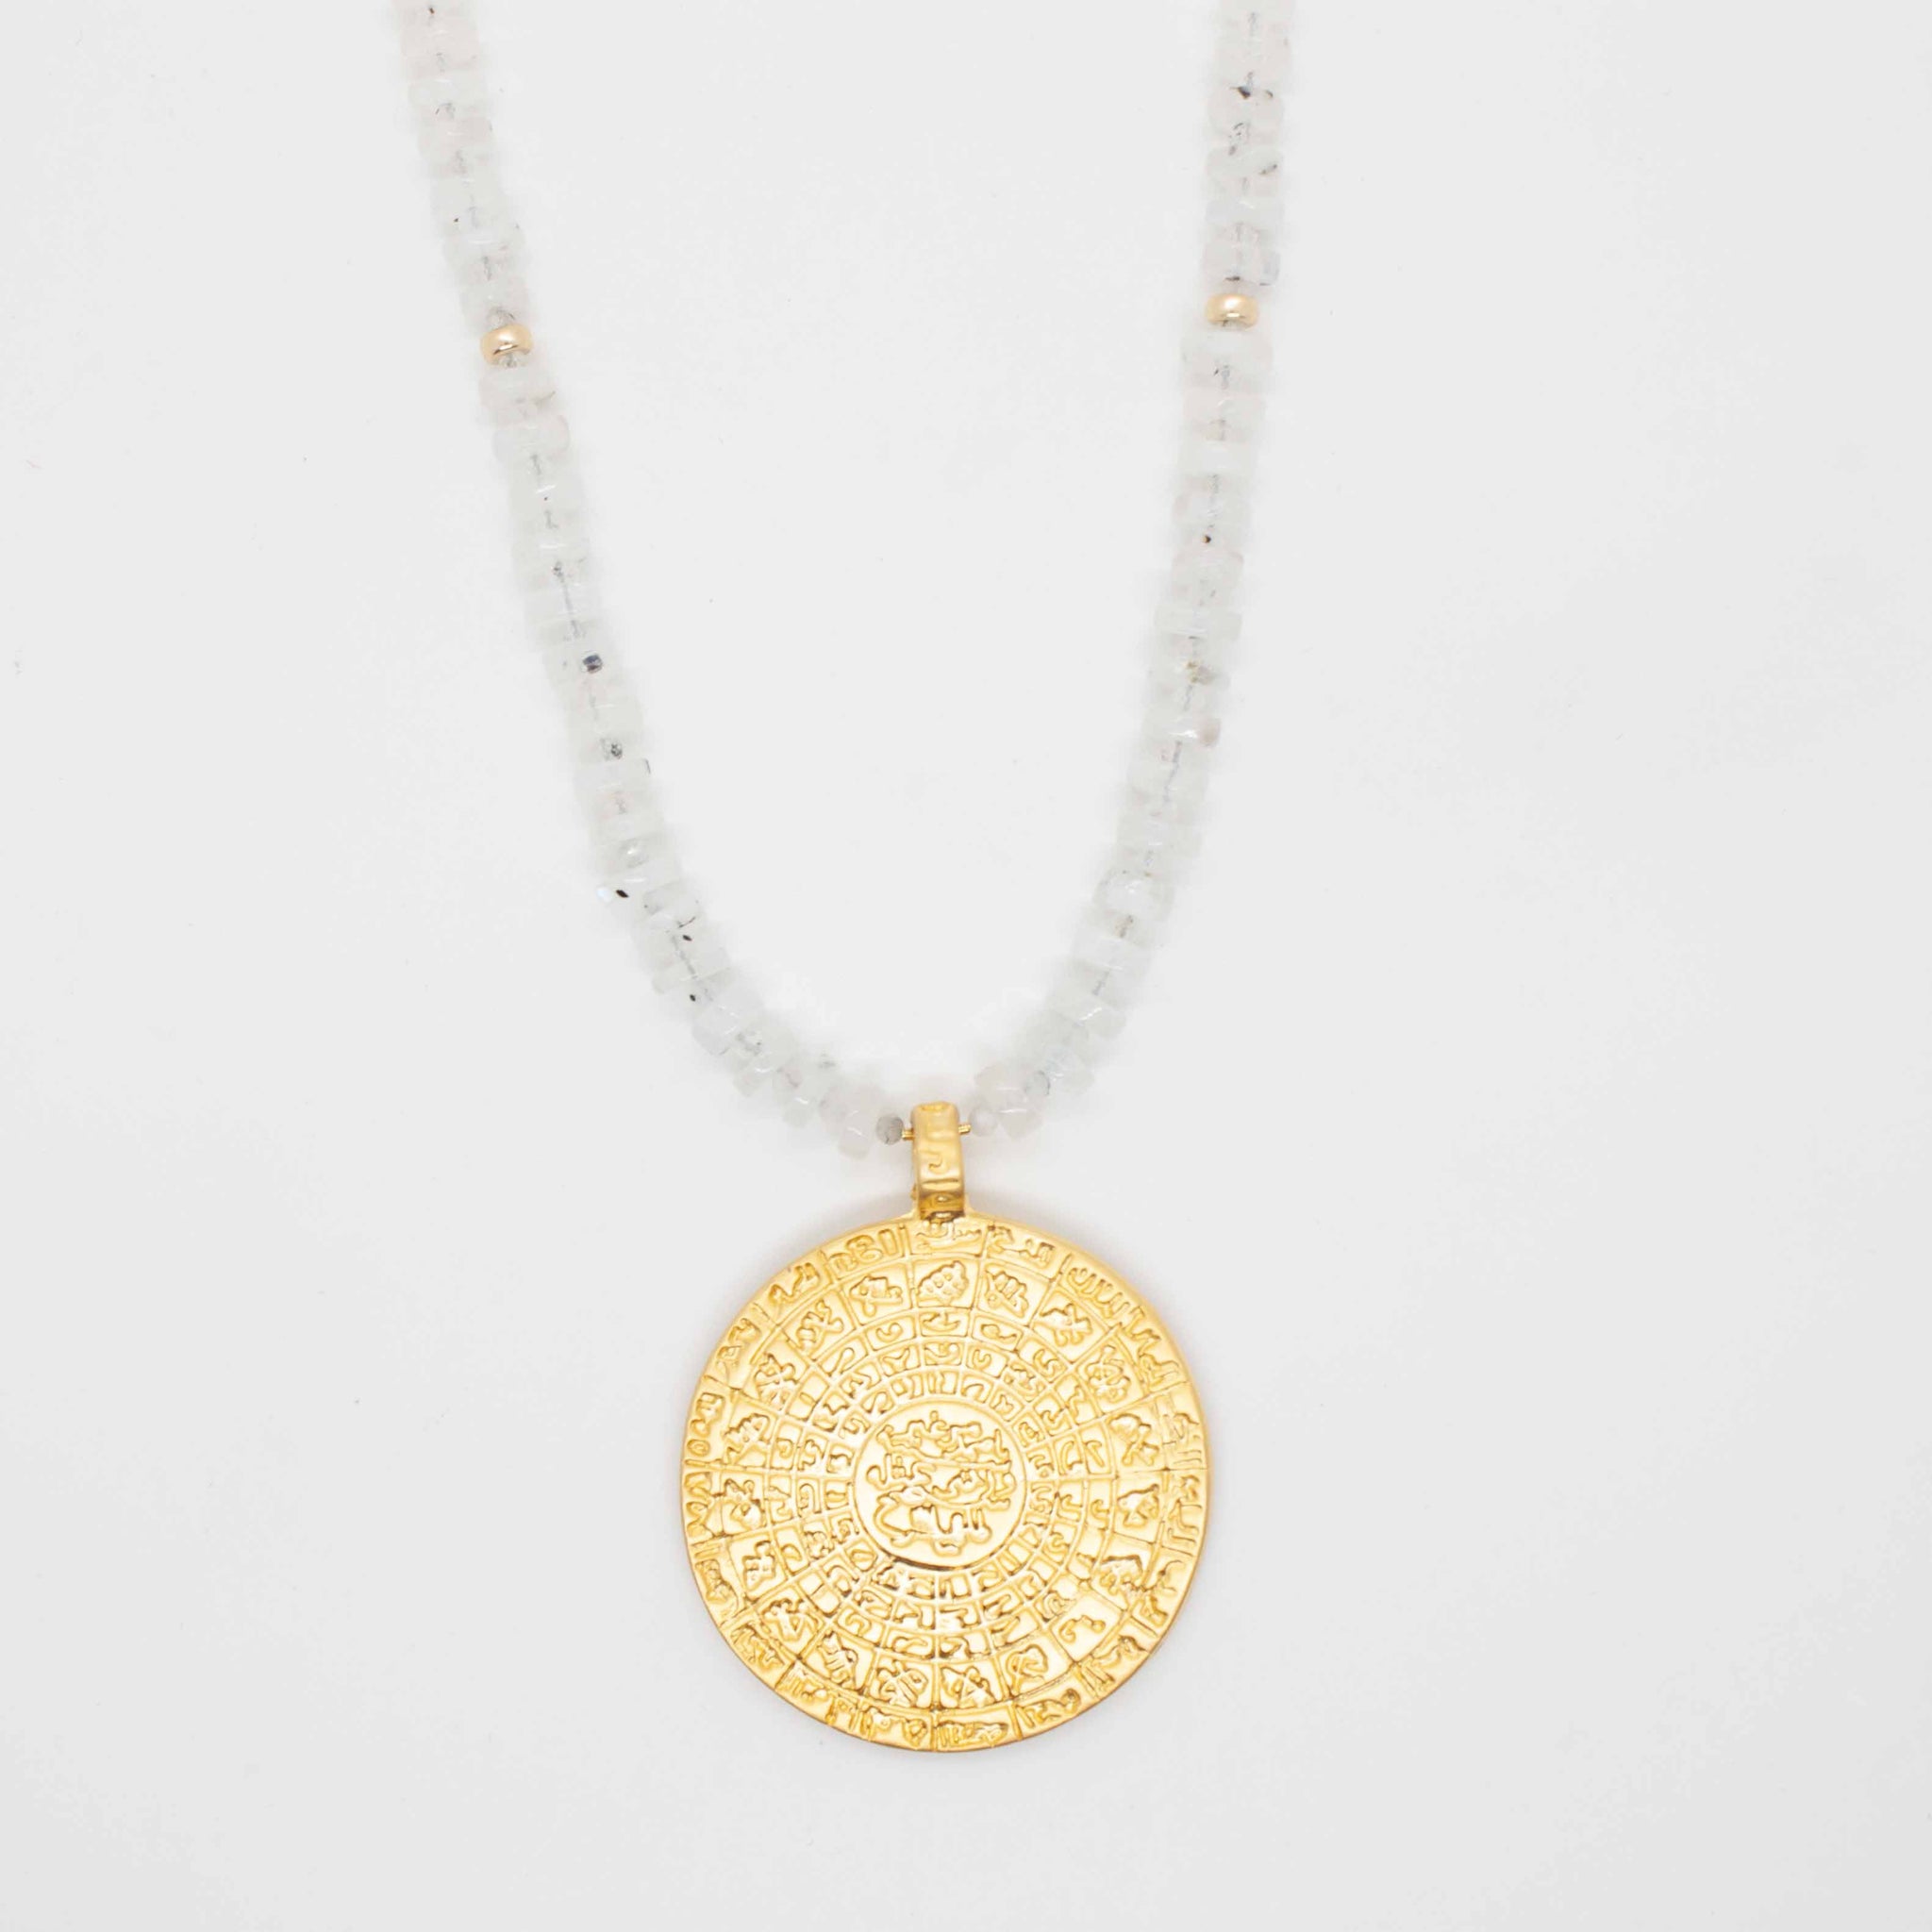 Sparkling black and white moonstone is paired perfectly with a striking golden coin pendant in this delicate and distinguished piece.  20 inch necklace, beaded with black & white moonstone and oversized golden coin pendant gold-filled spring ring clasp handmade in Toronto kp jewelry co.